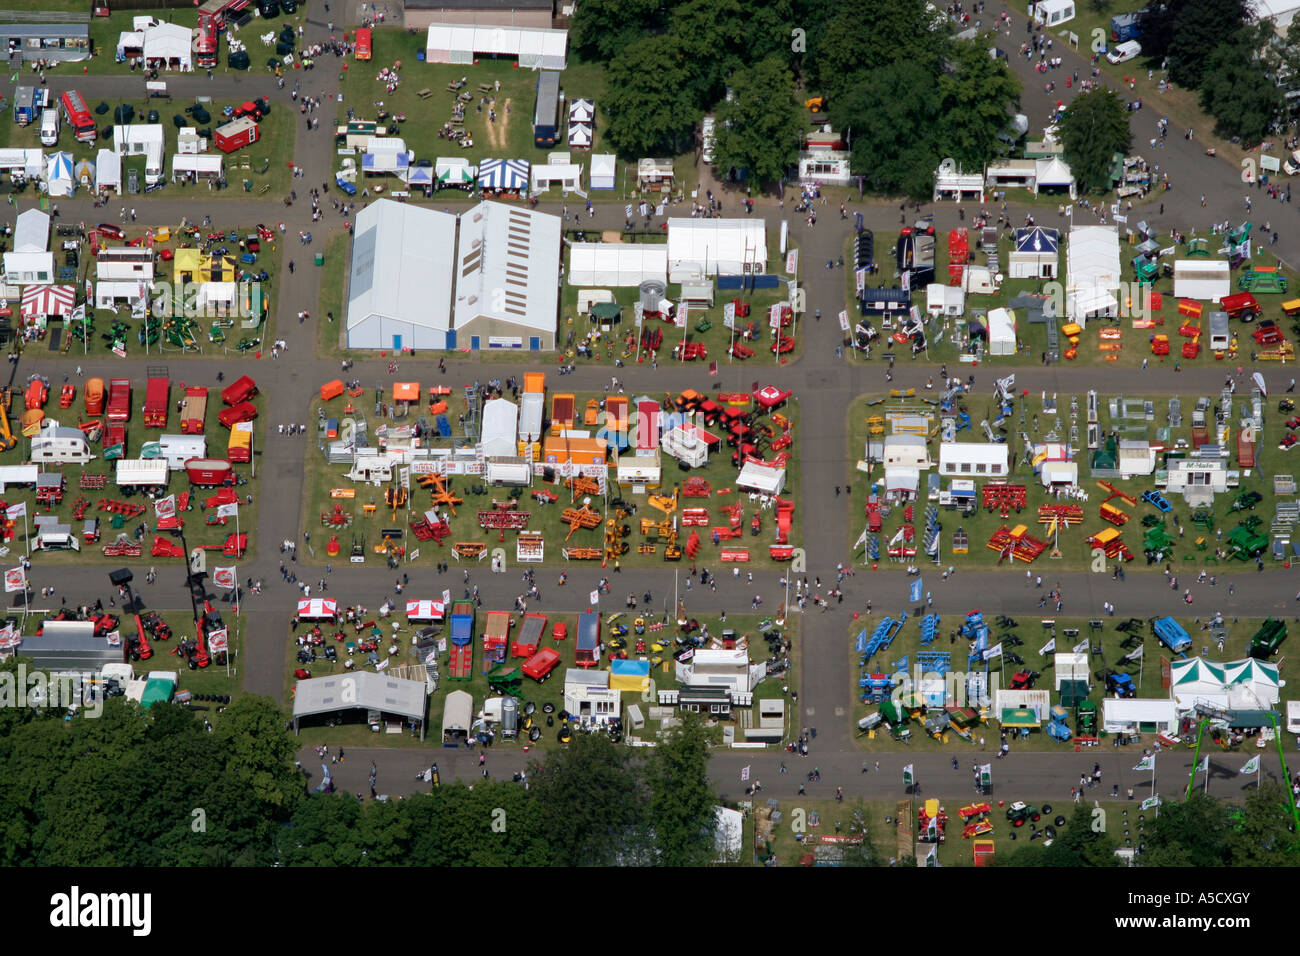 Aerial view of Royal Highland Show Ingleston Edinburgh Photograph shows exhibitor spaces with agricultural machinery Stock Photo